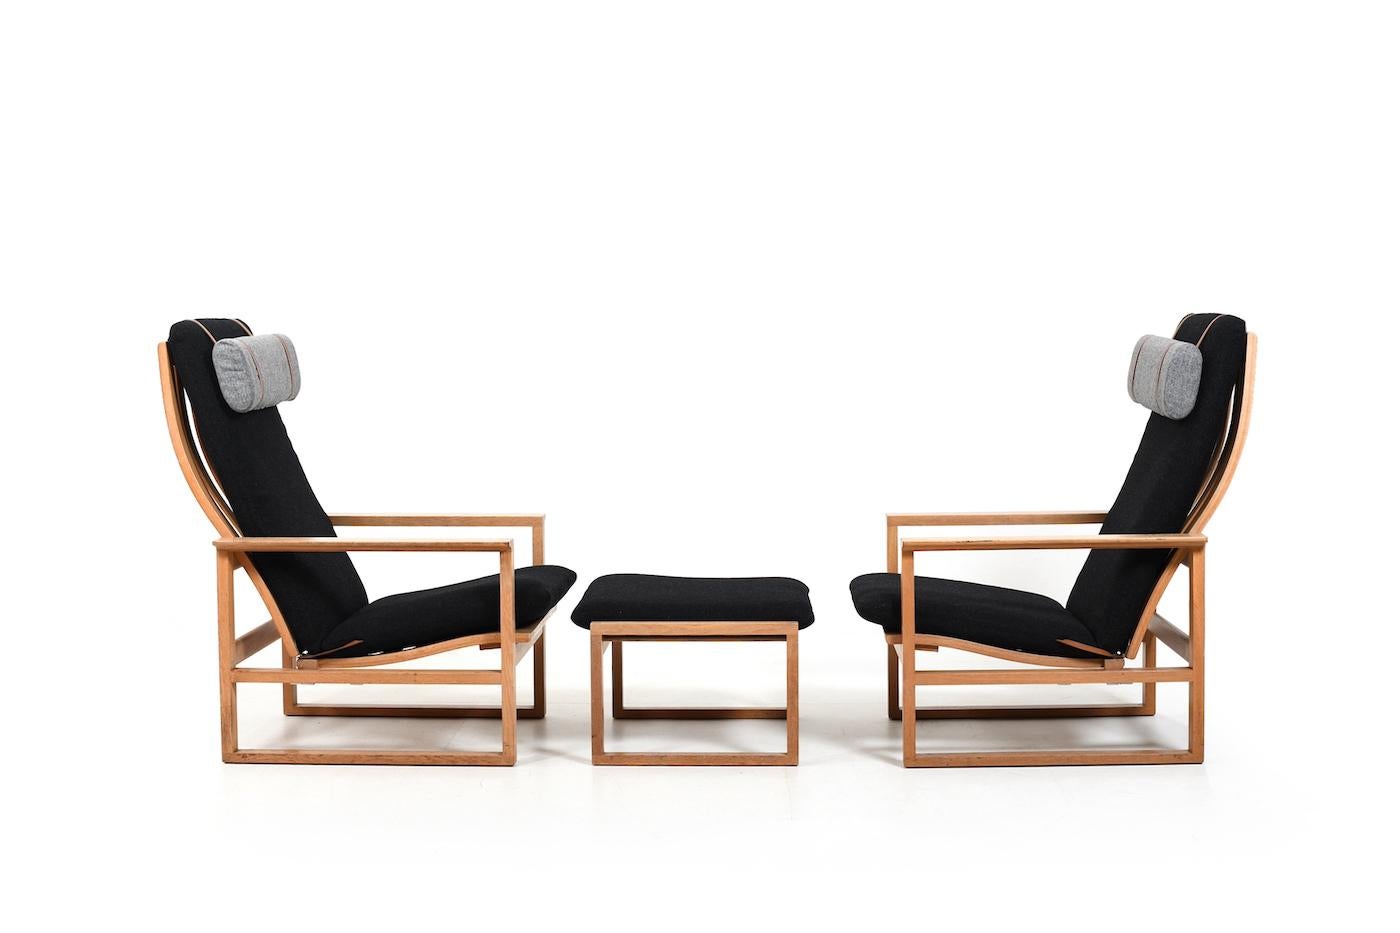 Pair of slaedestolen / sled chairs in solid oak by Børge Mogensen for Fredericia Stolefabrik 1956. Model BM-2254 high back chair with reclining function. As well the matching footstool. New cushion and upholstery in wool fabric. Produced 1960s.